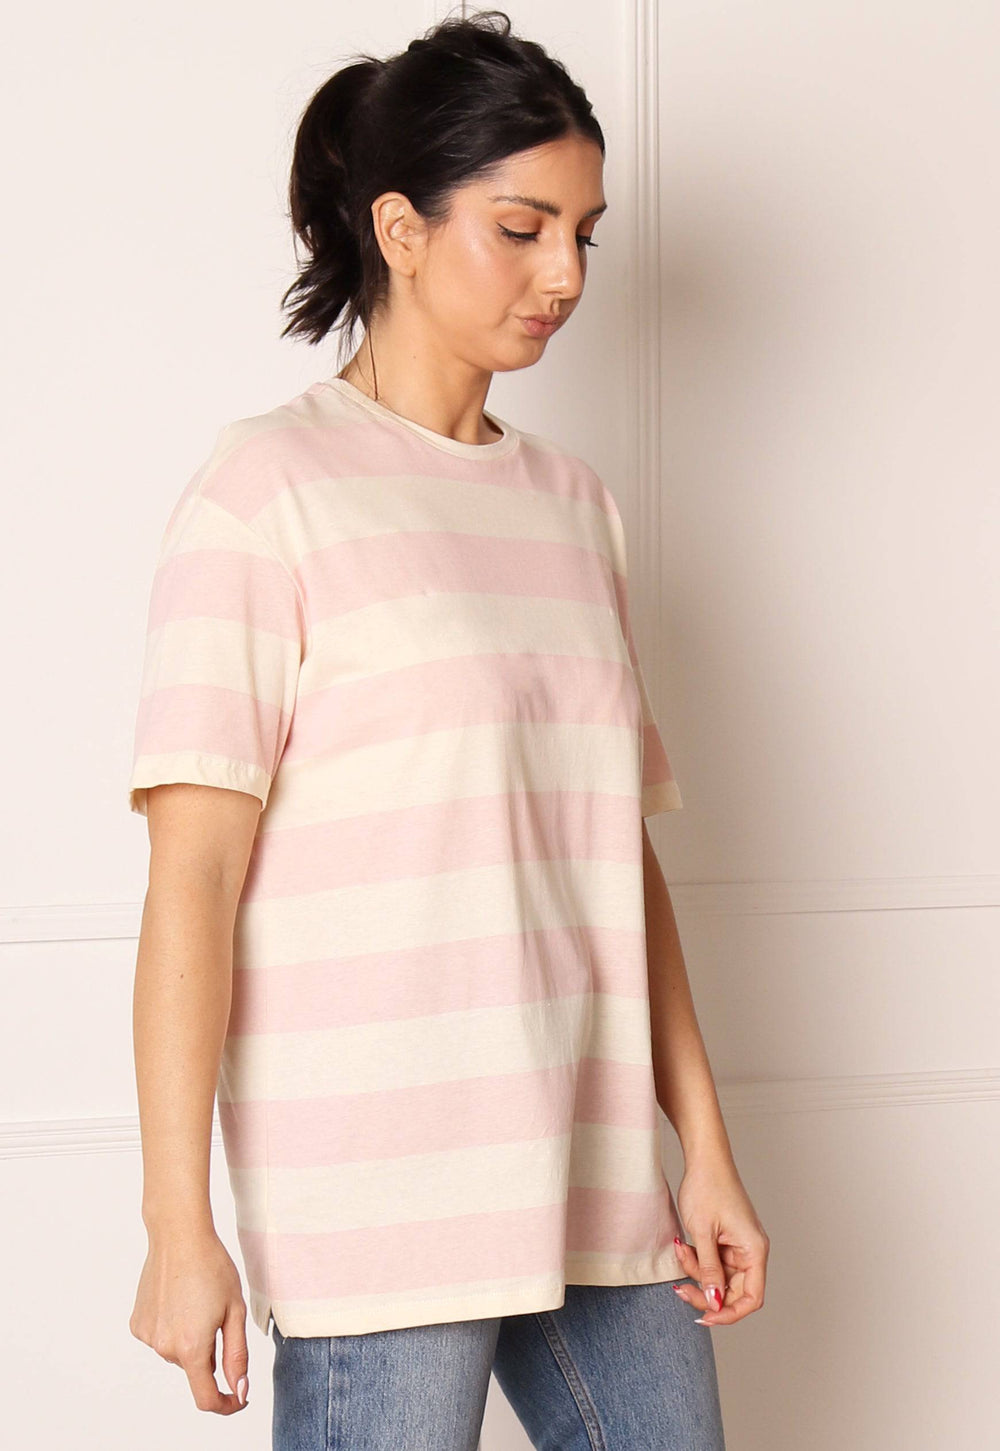 PIECES Wide Stripe Oversized Tee in Pink & Cream - One Nation Clothing